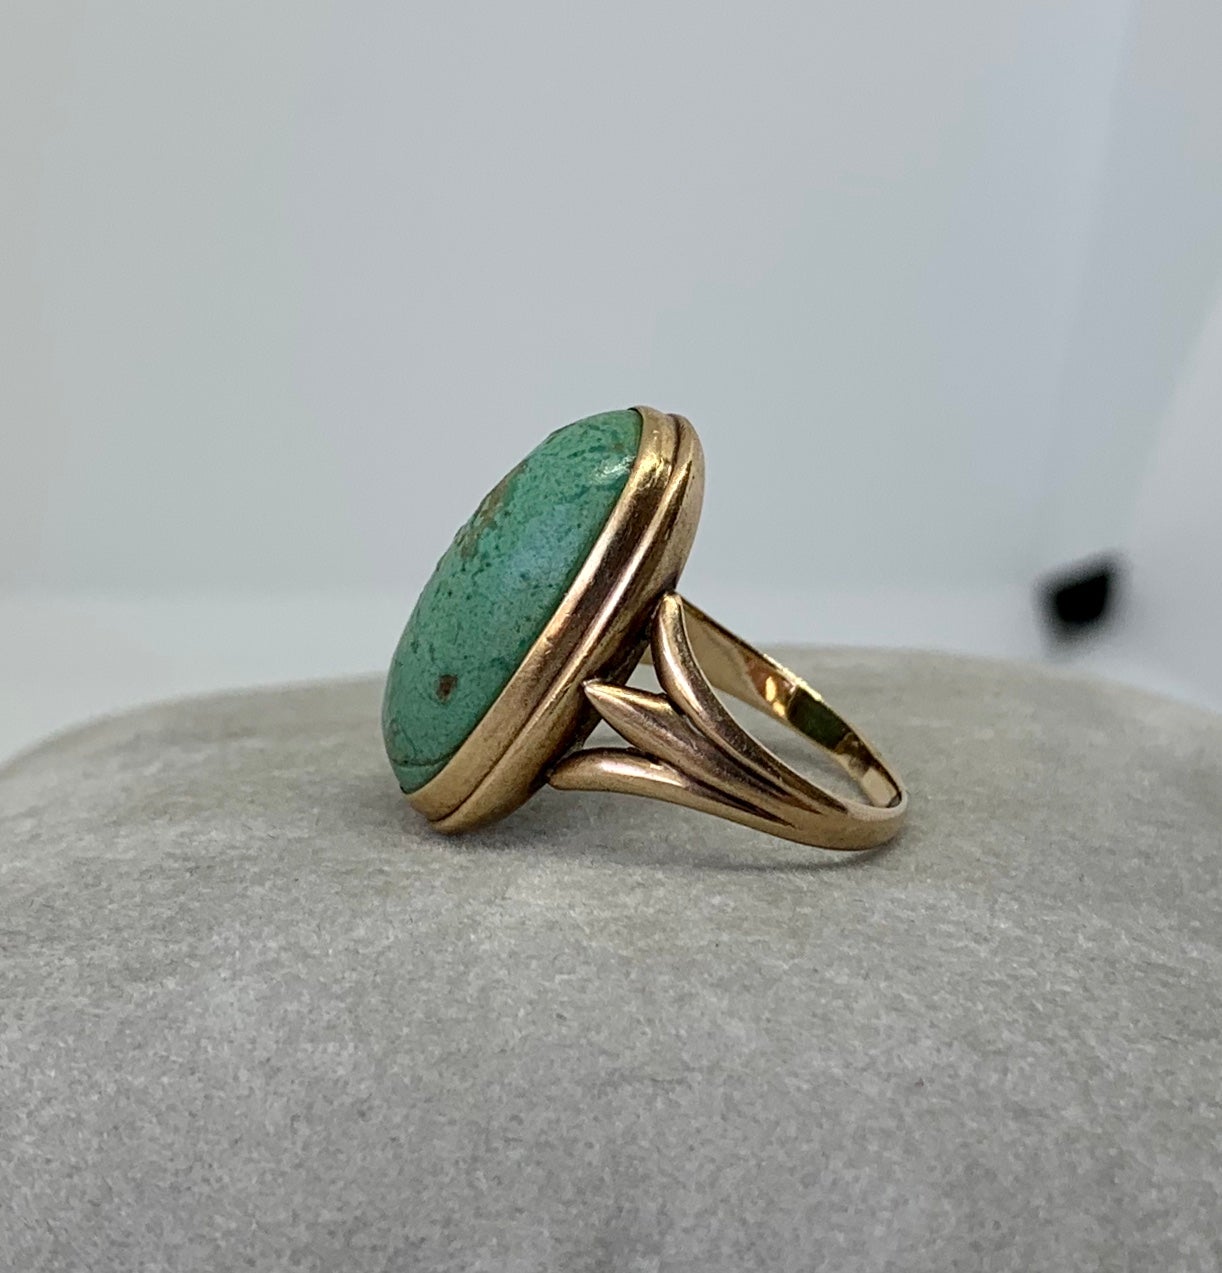 This is a gorgeous antique Turquoise Ring with a stunning 19mm by 10mm by 5mm Turquoise Cabochon.  The Turquoise is set in two lovely bands of gold with a wonderful scroll motif shank in 10 Karat Yellow Gold.  The vivid oval Turquoise cabochon is of